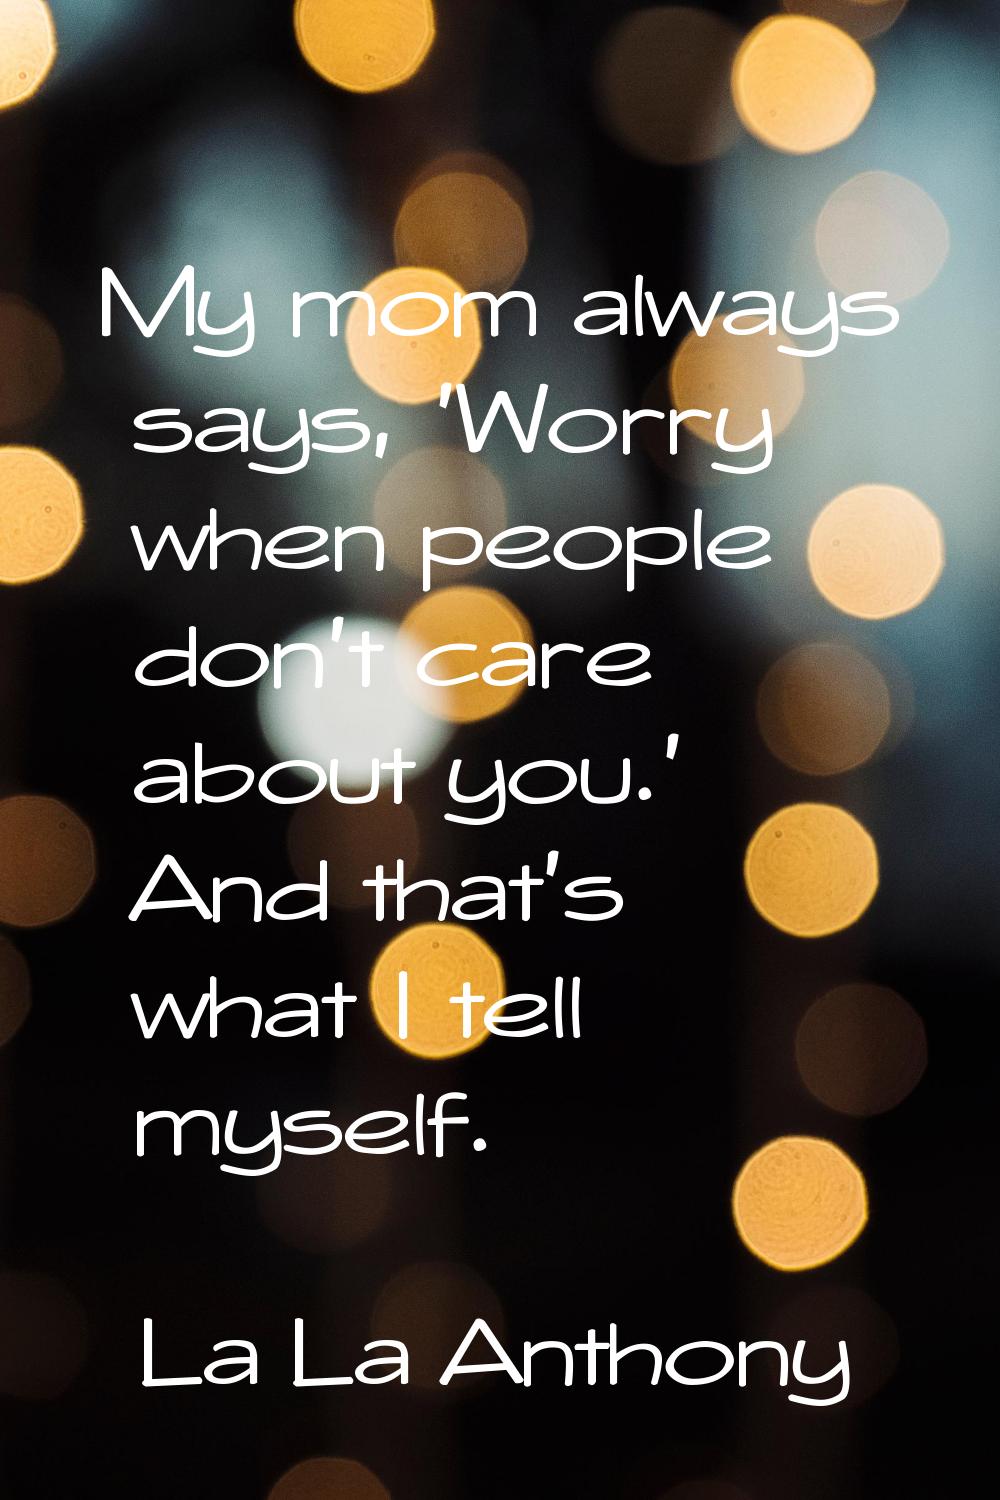 My mom always says, 'Worry when people don't care about you.' And that's what I tell myself.